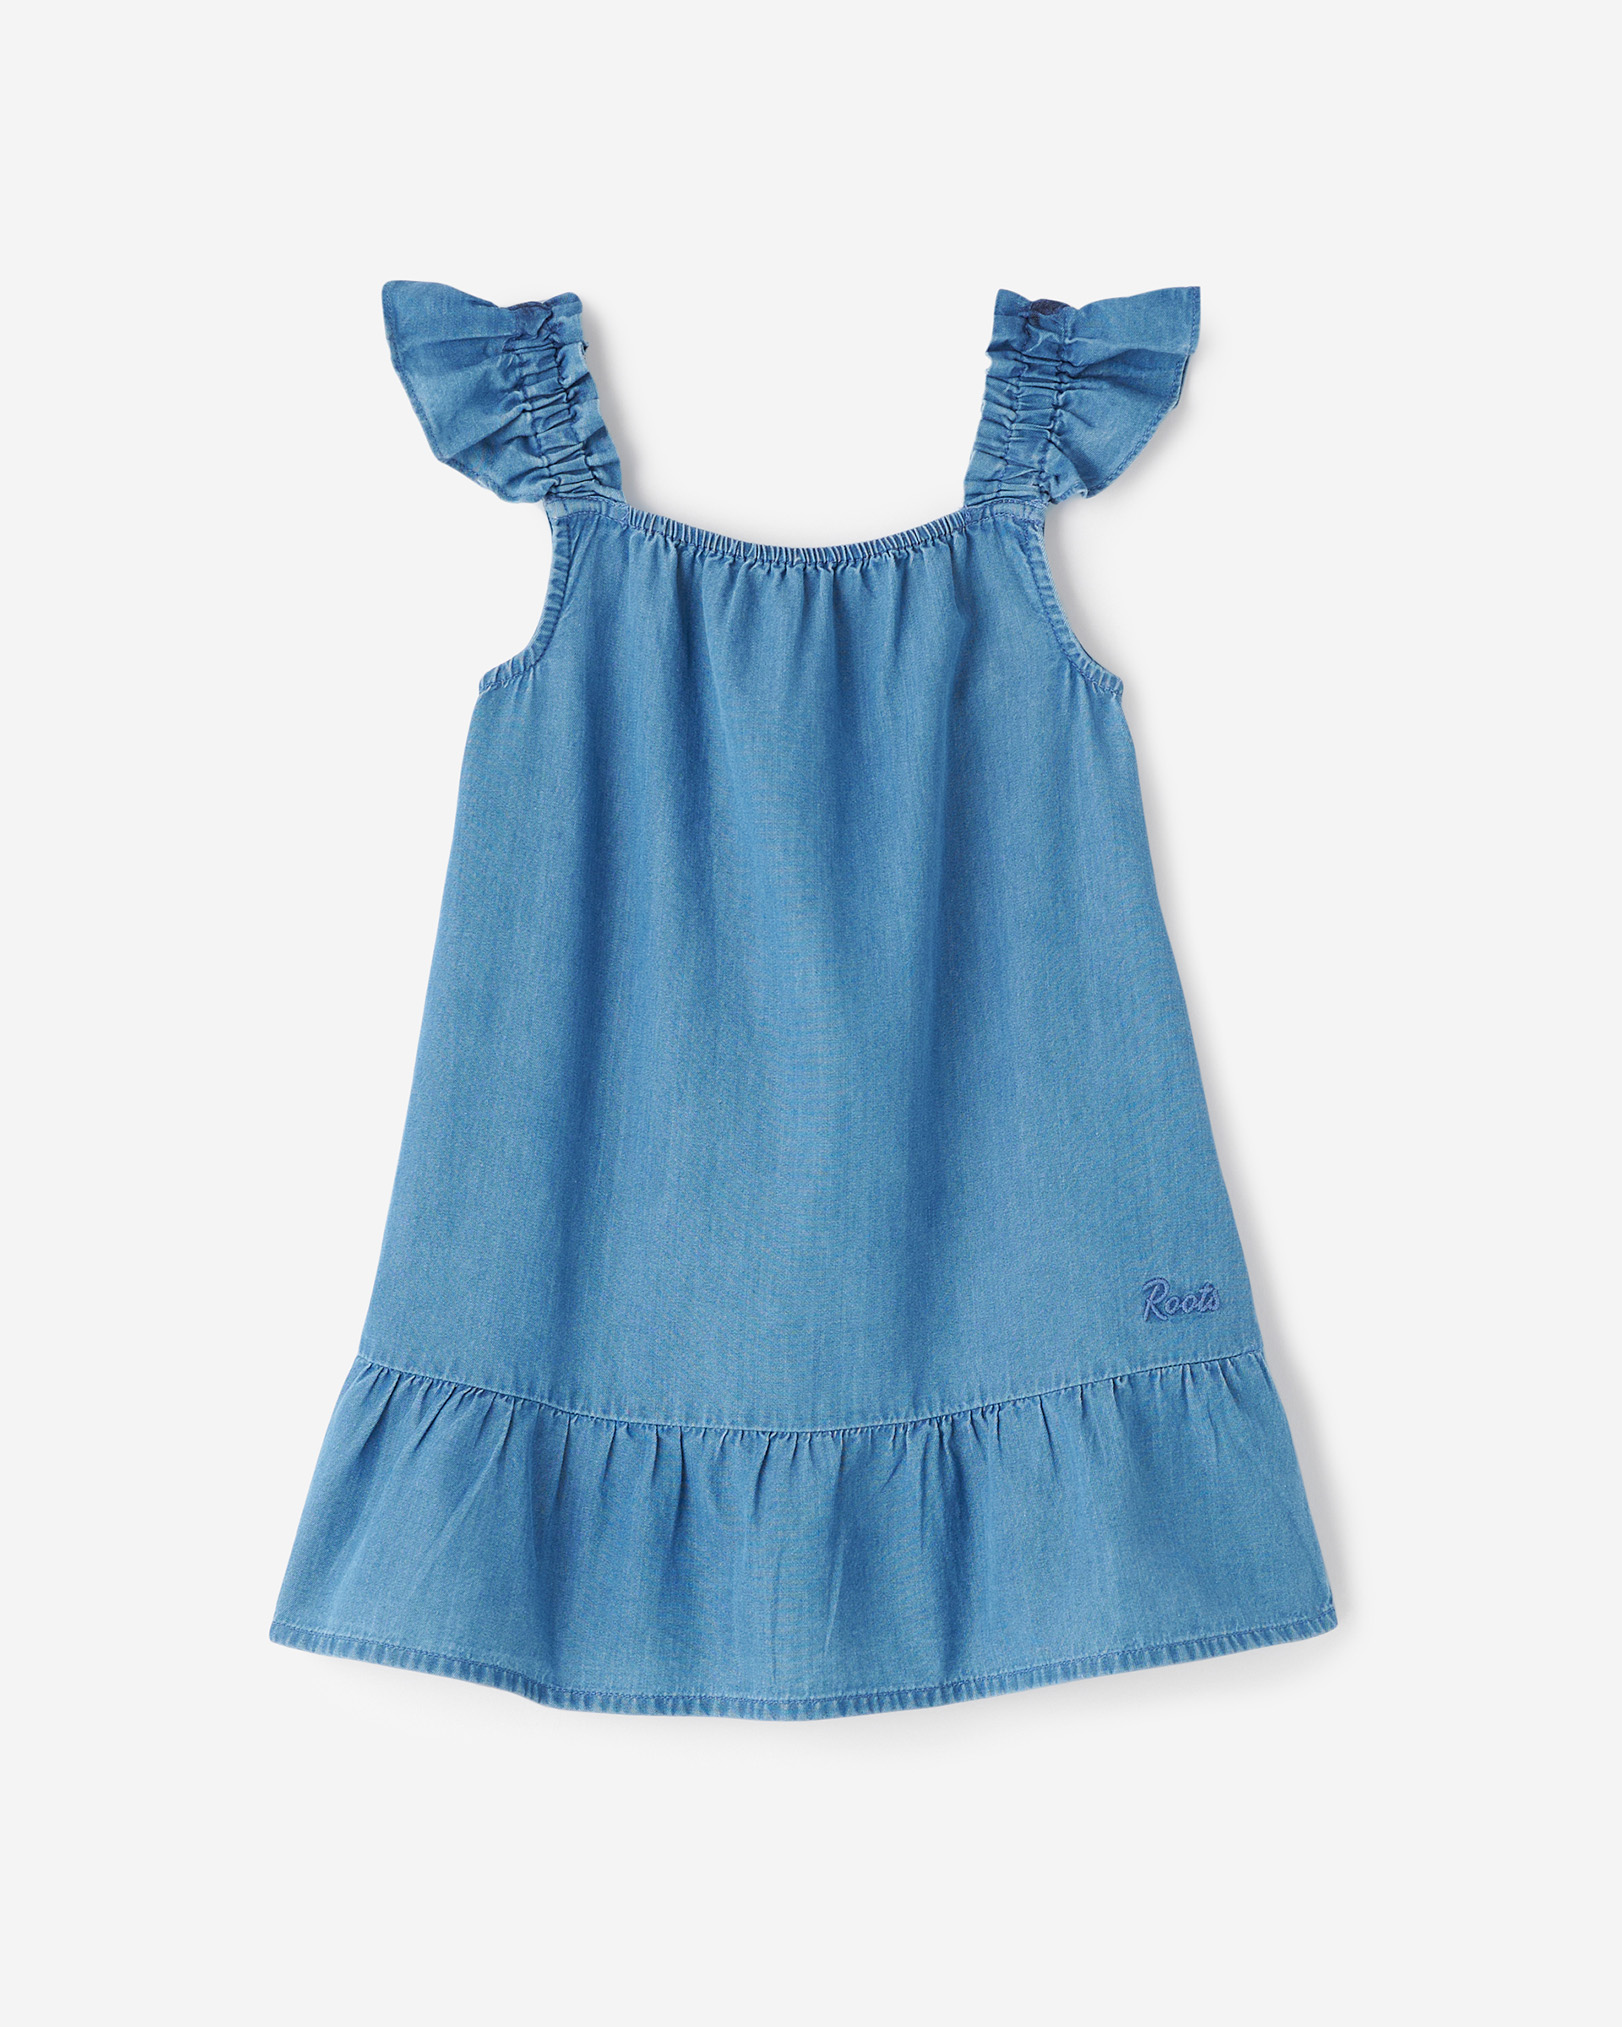 Roots Toddler Girl's Chambray Ruffle Dress in Washed Indigo